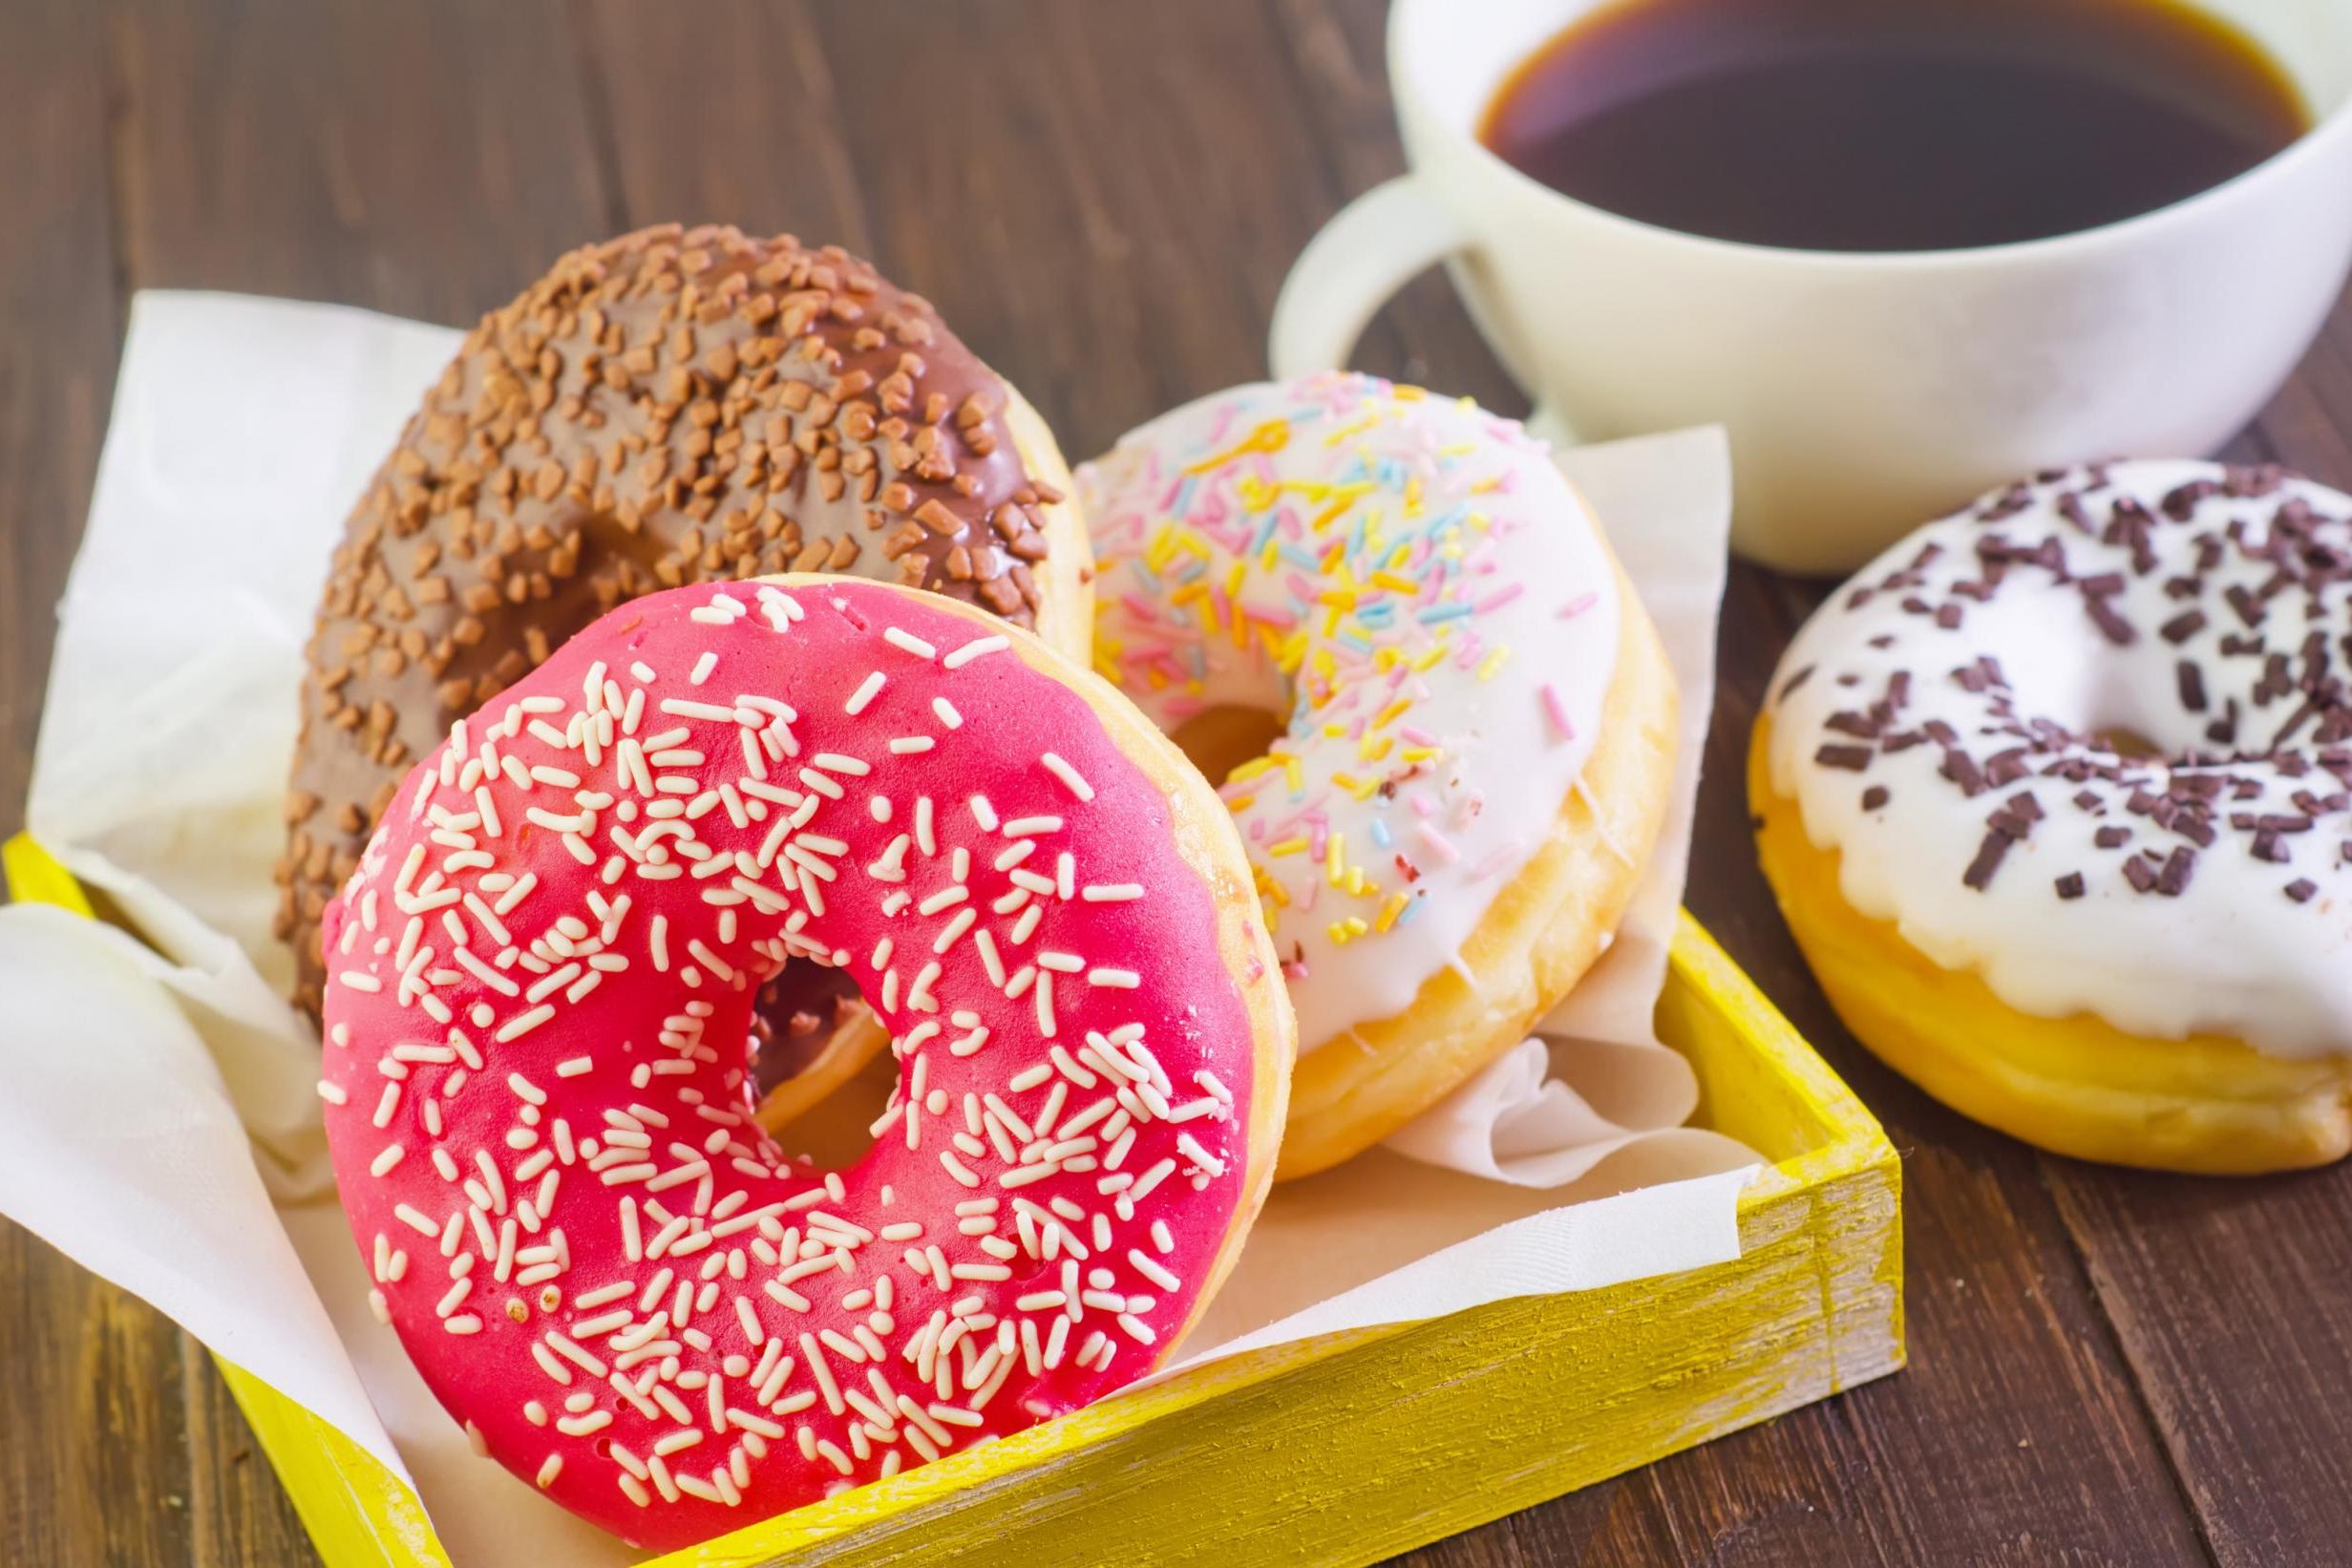 Caffeine induces cravings for sweet foods suggests study 